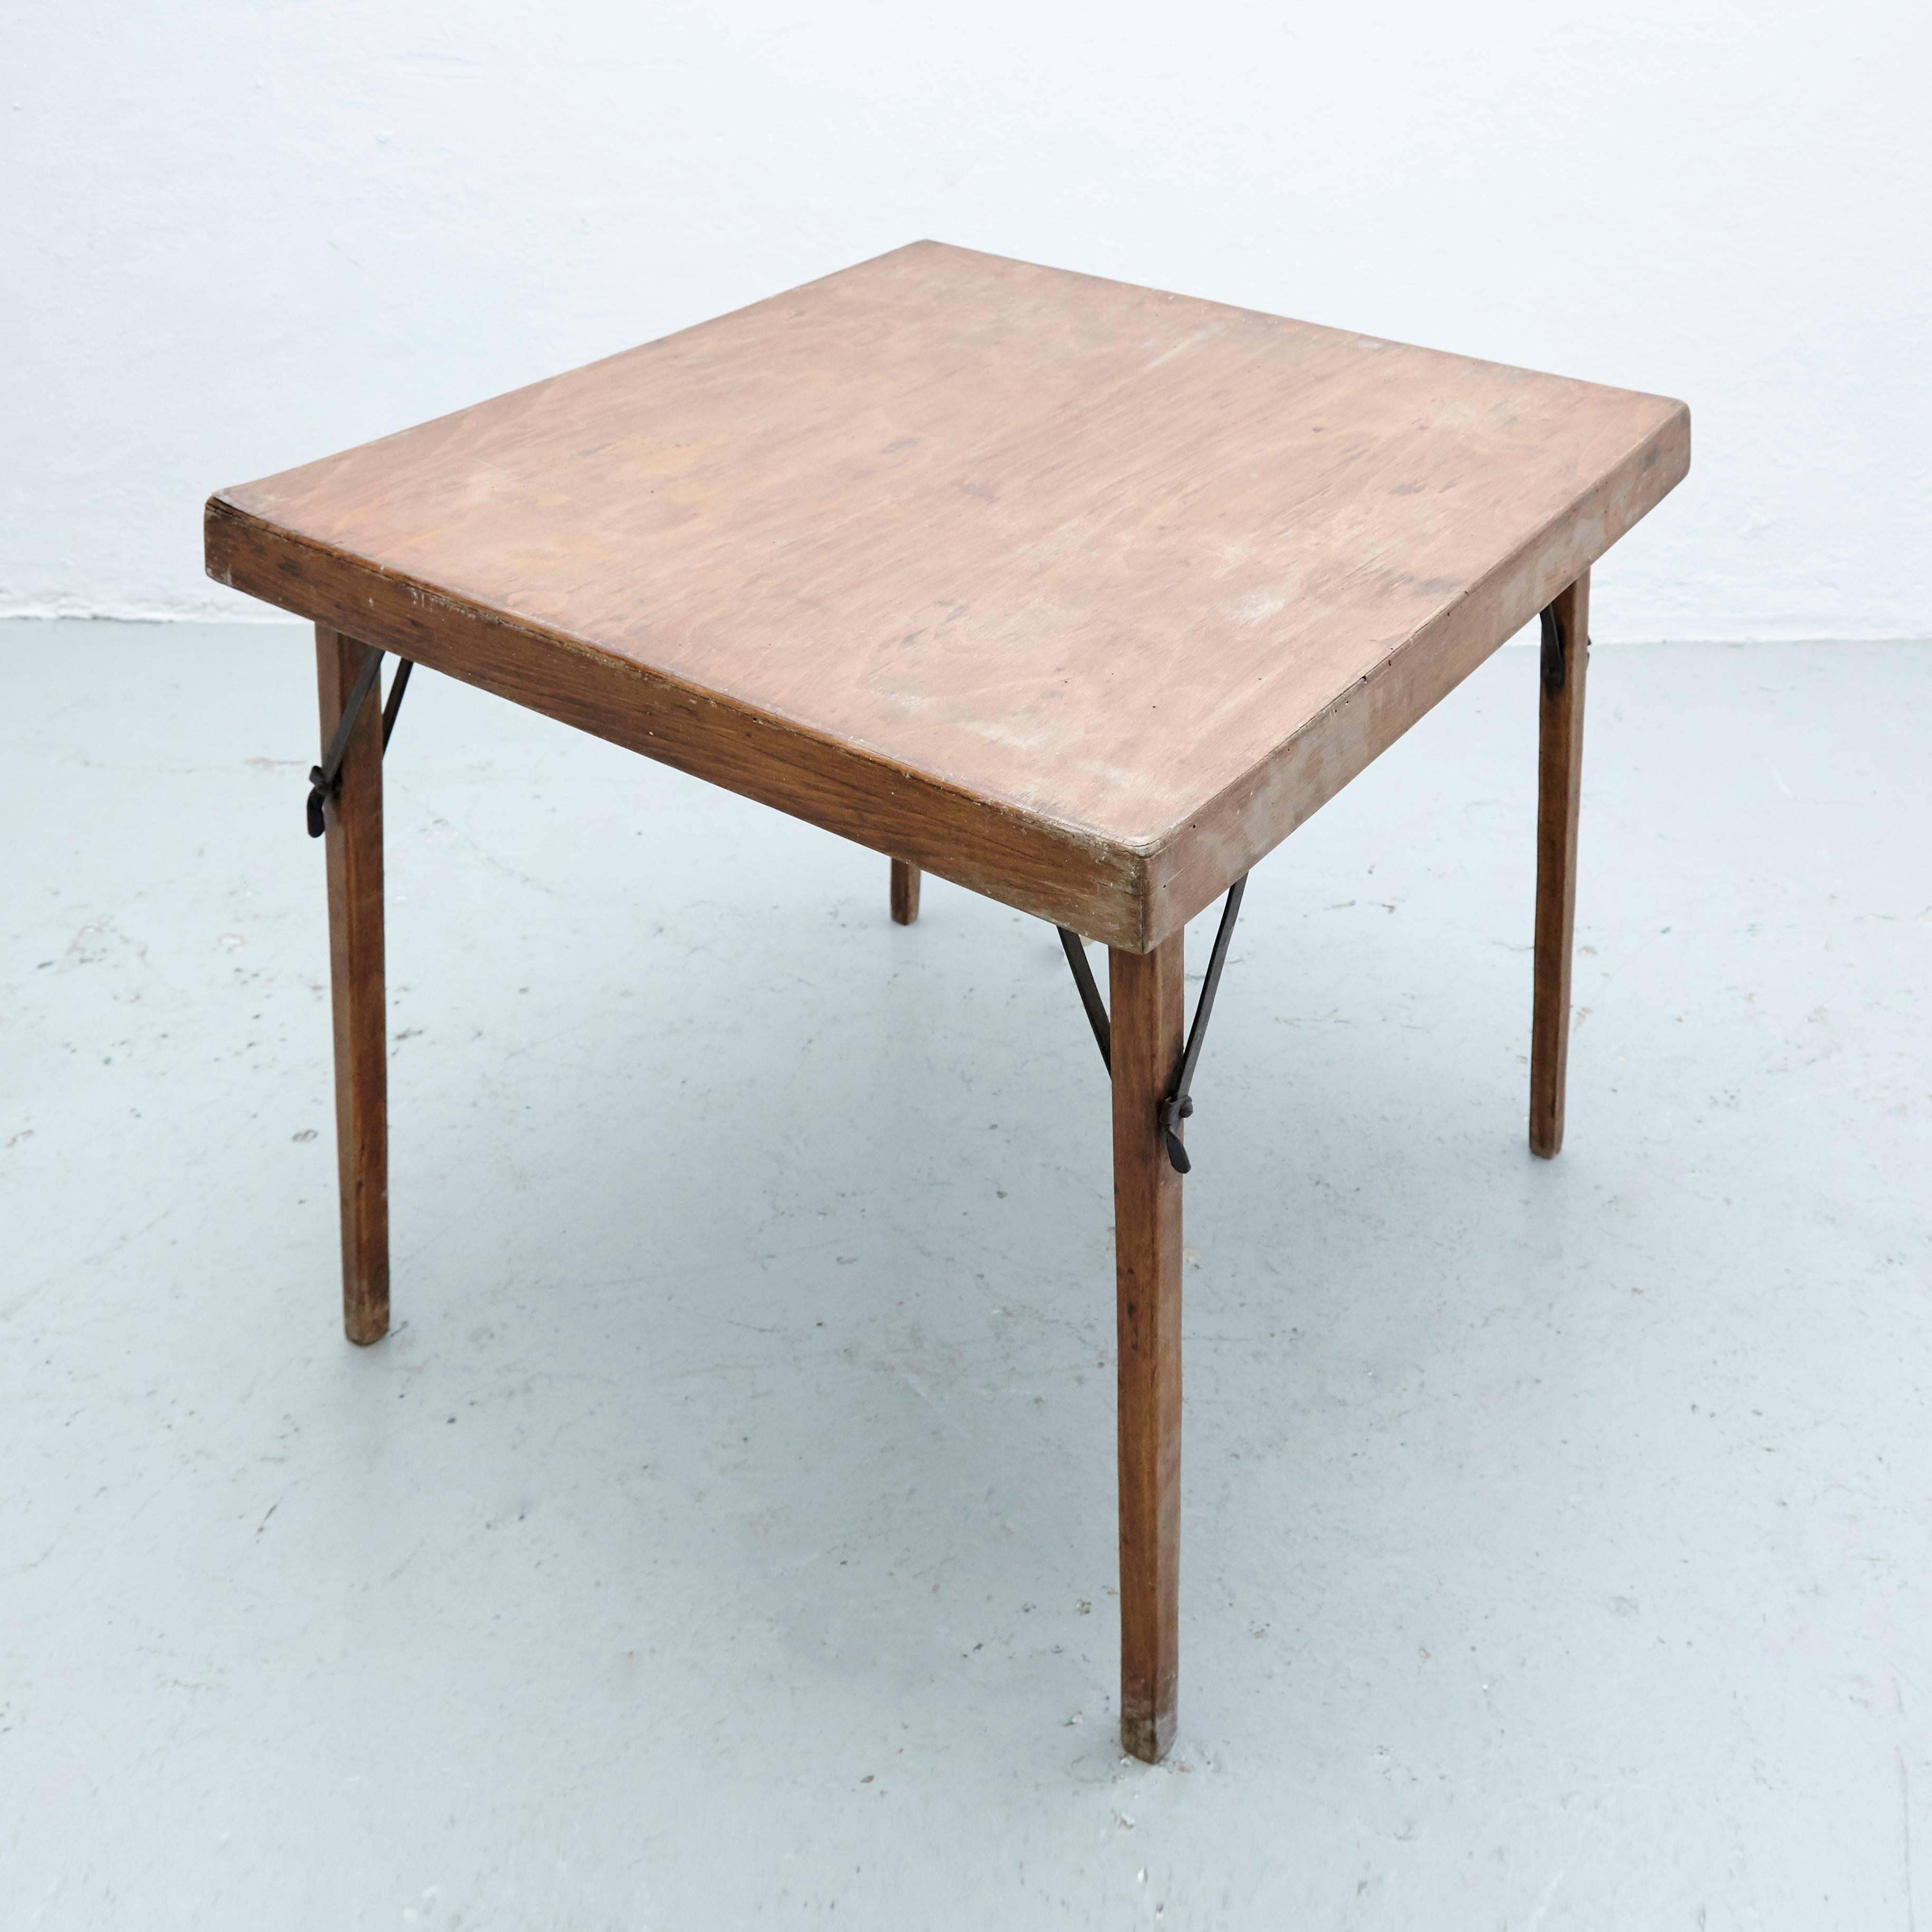 Rare Folding table T211 designed by Thonet manufactured In Germany, circa 1930.

In good original condition, with minor wear consistent with age and use, preserving a beautiful patina.

In the 1830s, Thonet began trying to make furniture out of